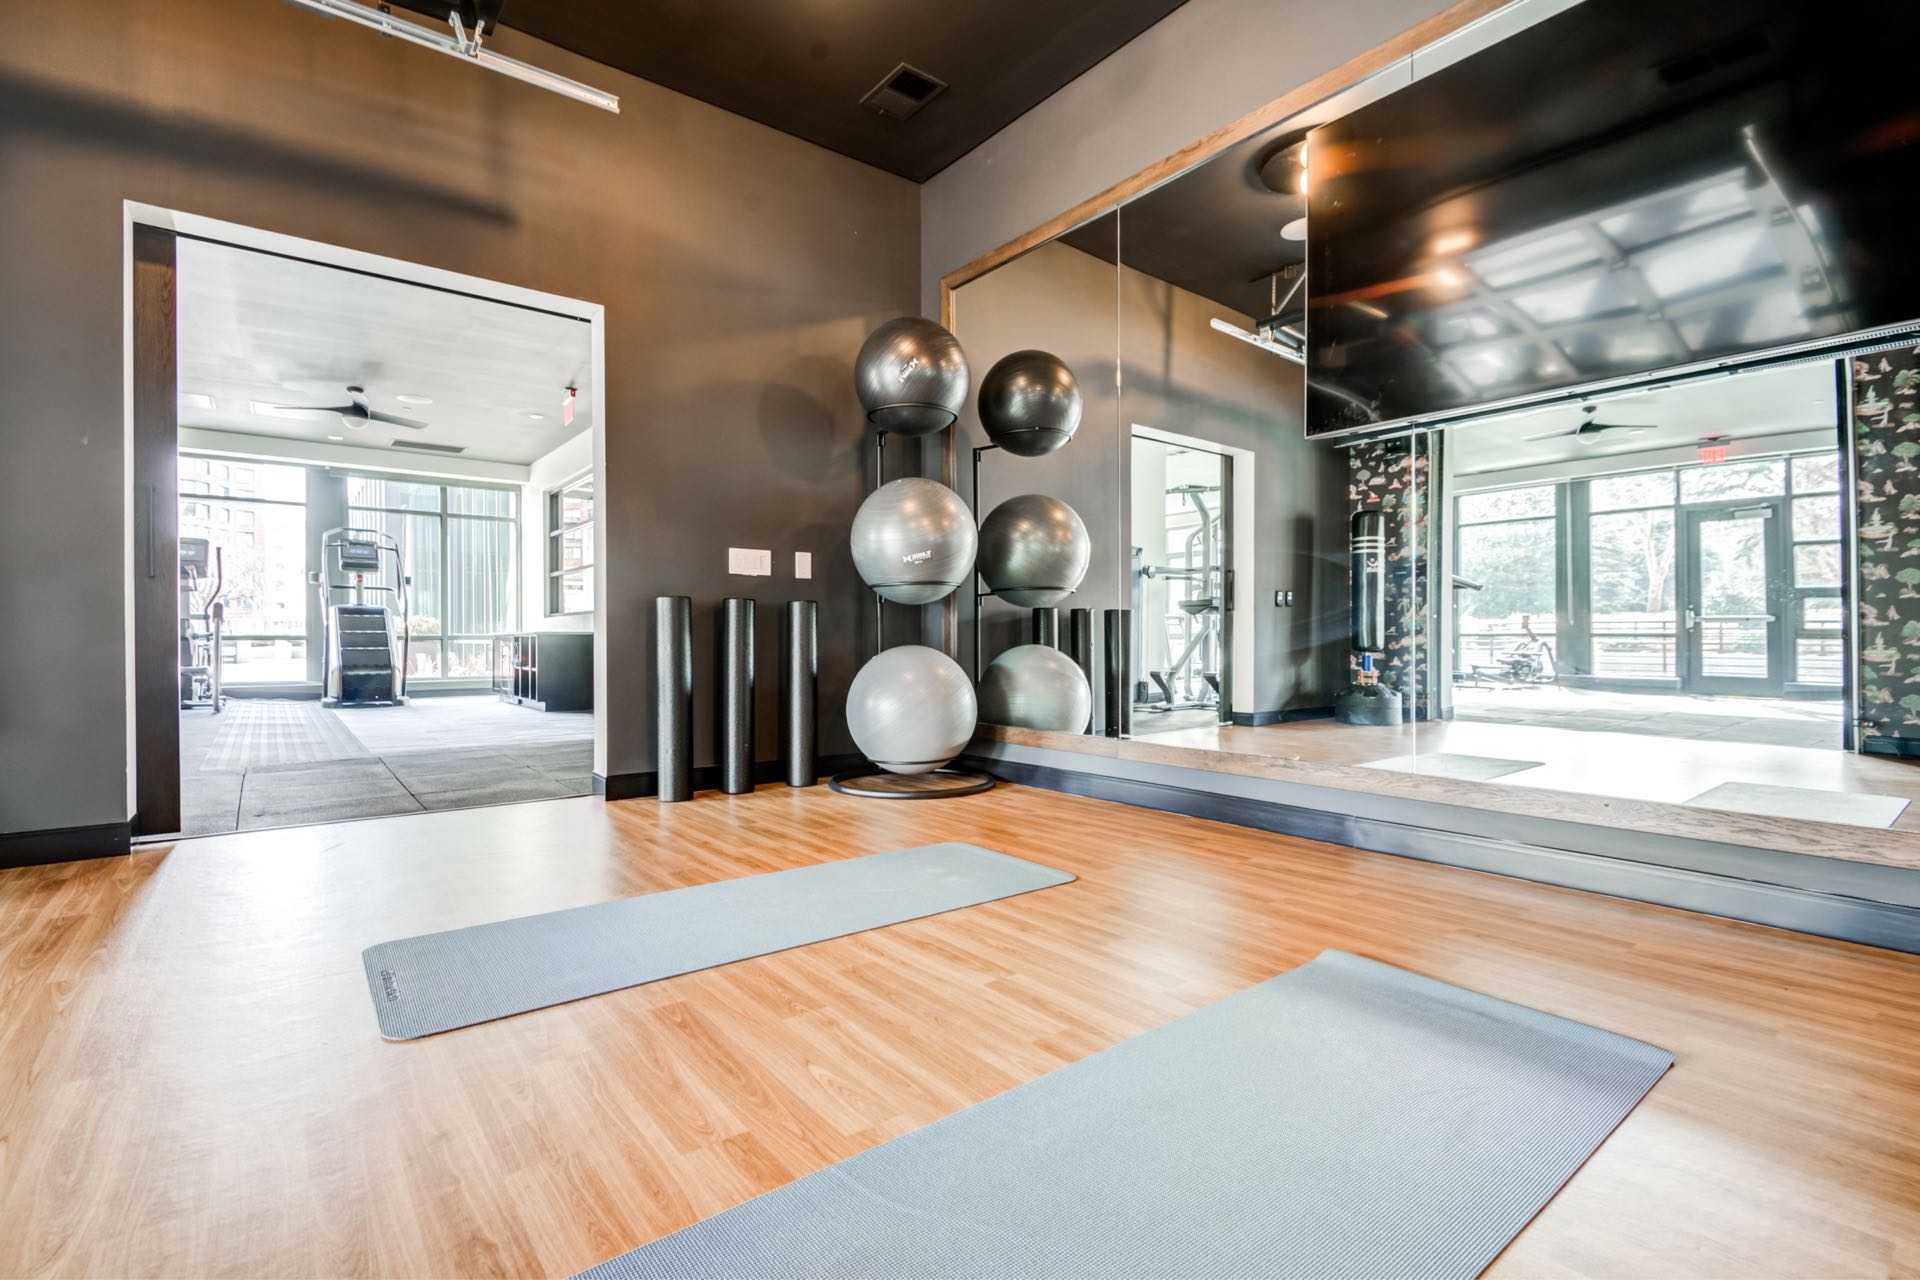 Studio with yoga mats, ballet barre, full-height mirrors, garage doors that open up to main fitness area, TV, and rubber-backed flooring